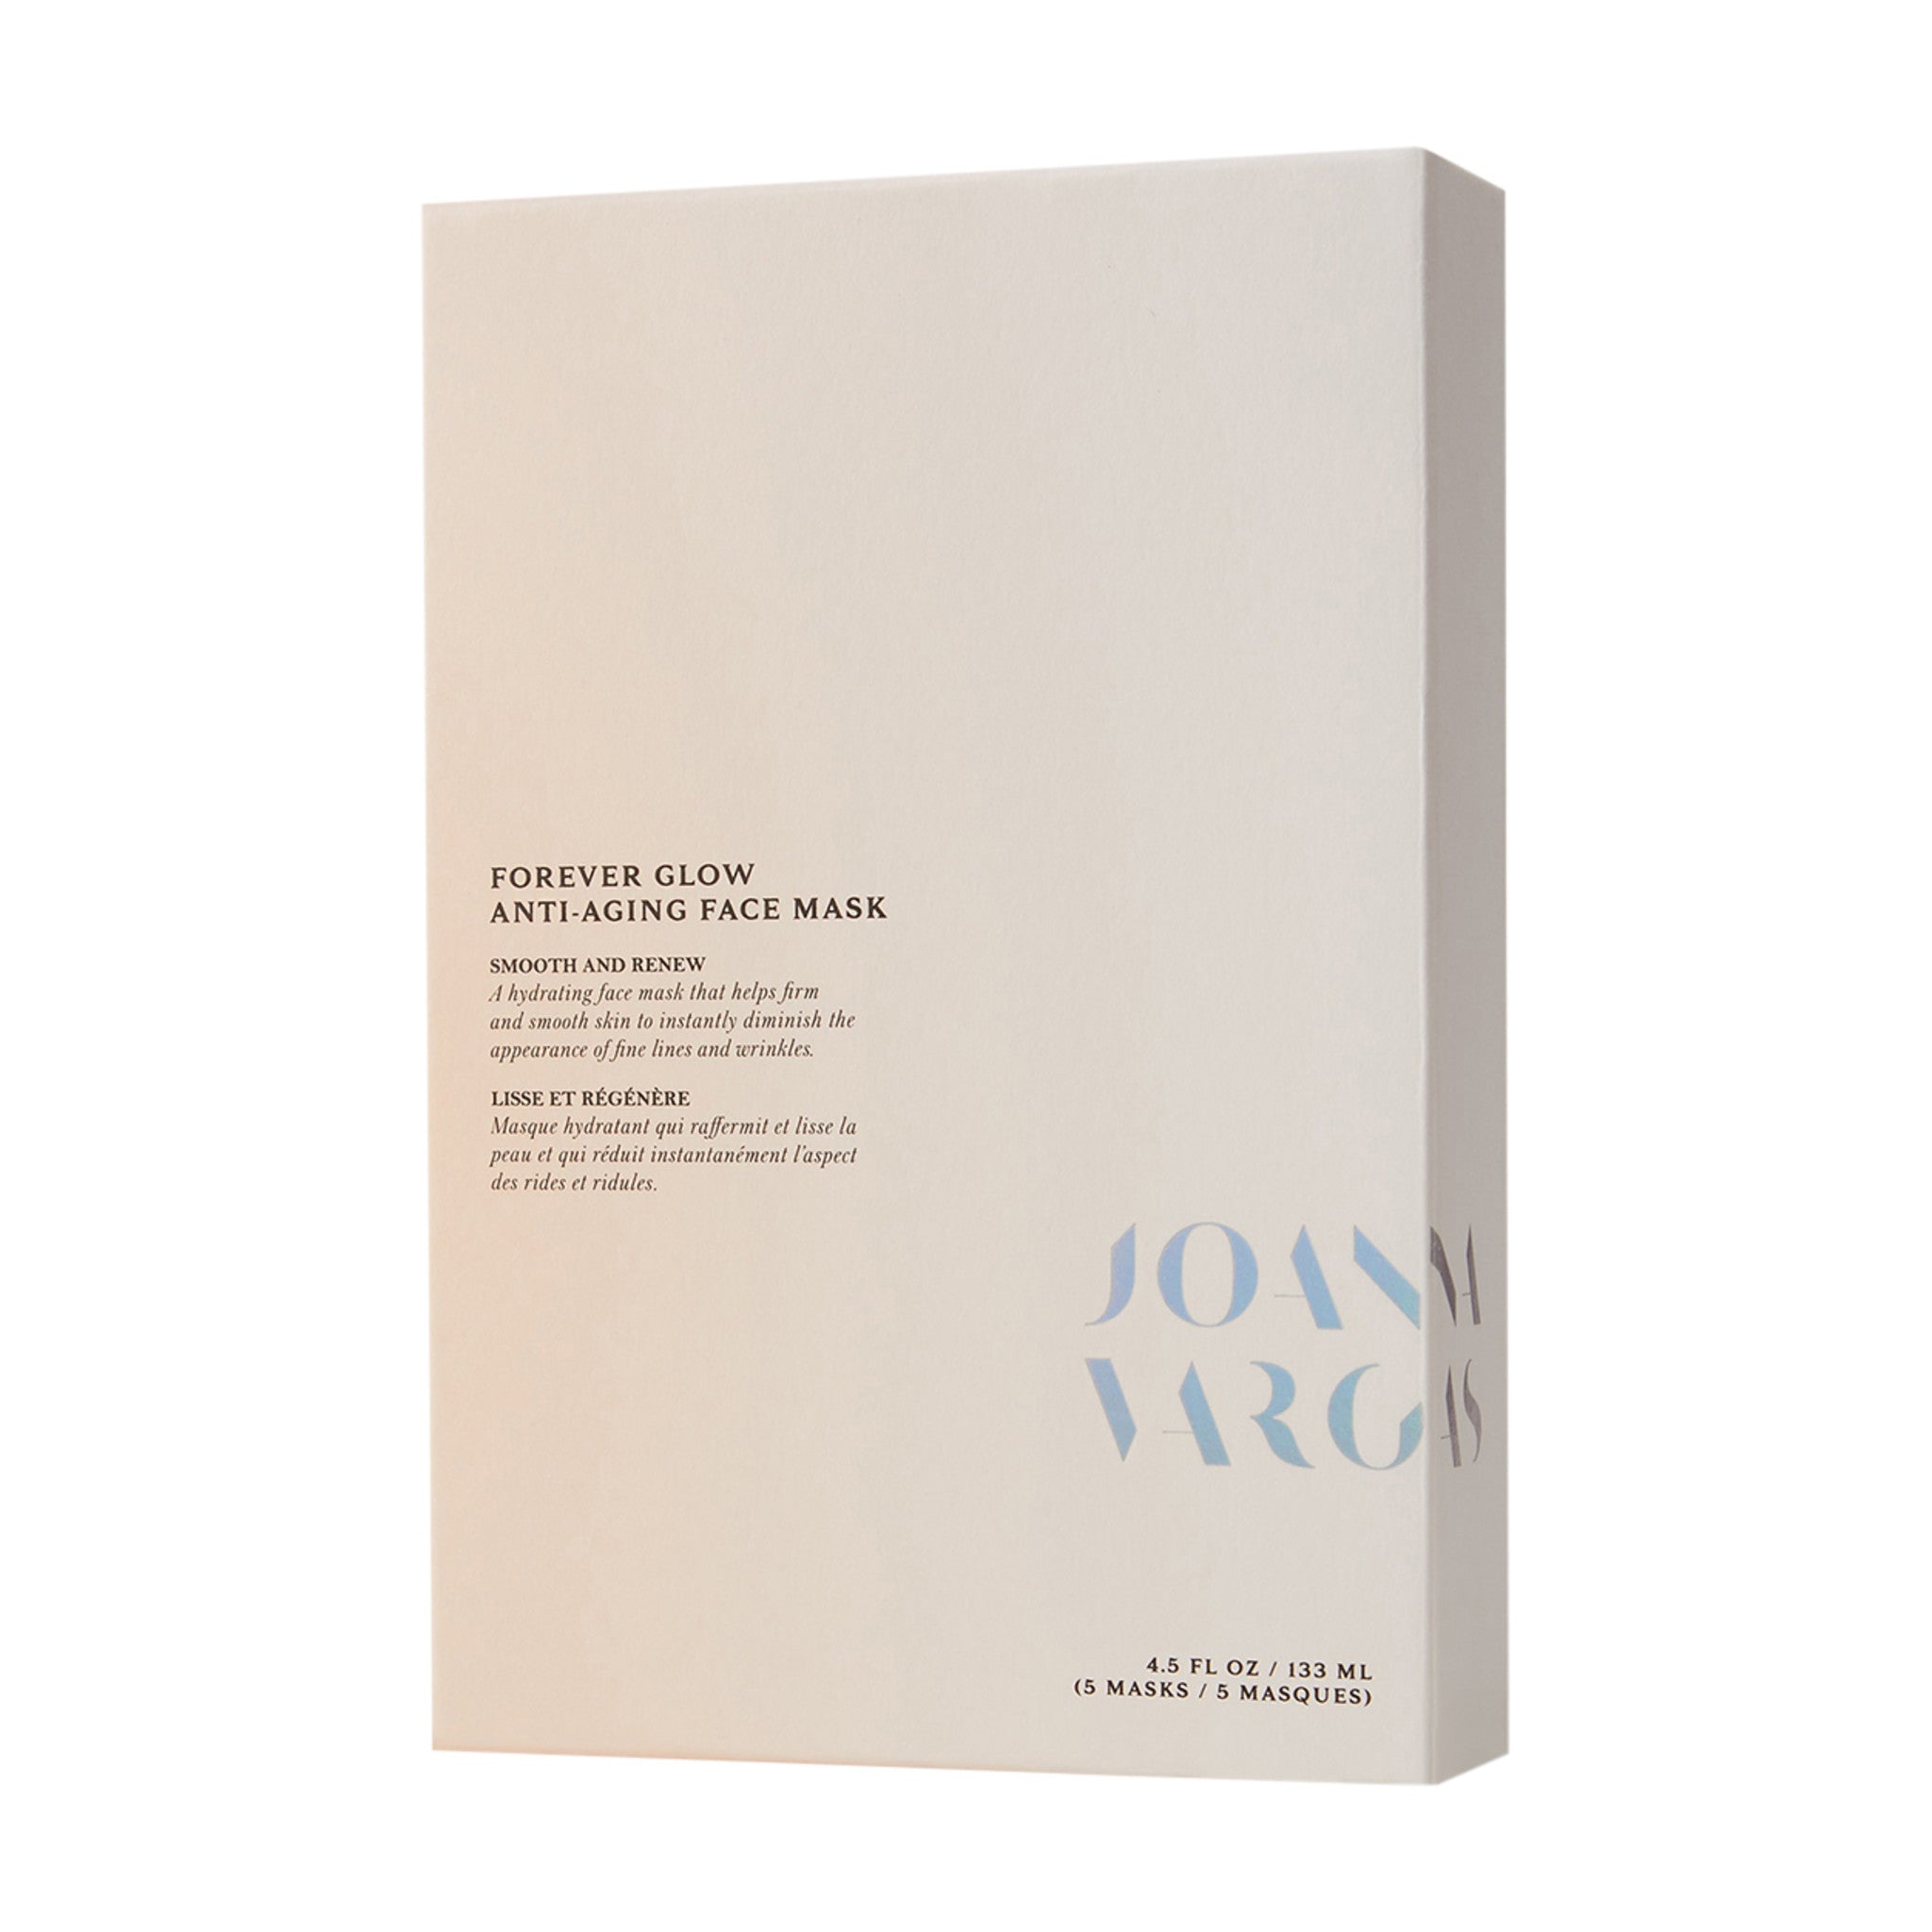 Joanna Vargas Forever Glow Anti-Aging Face Mask Size variant: 5 Treatments main image.